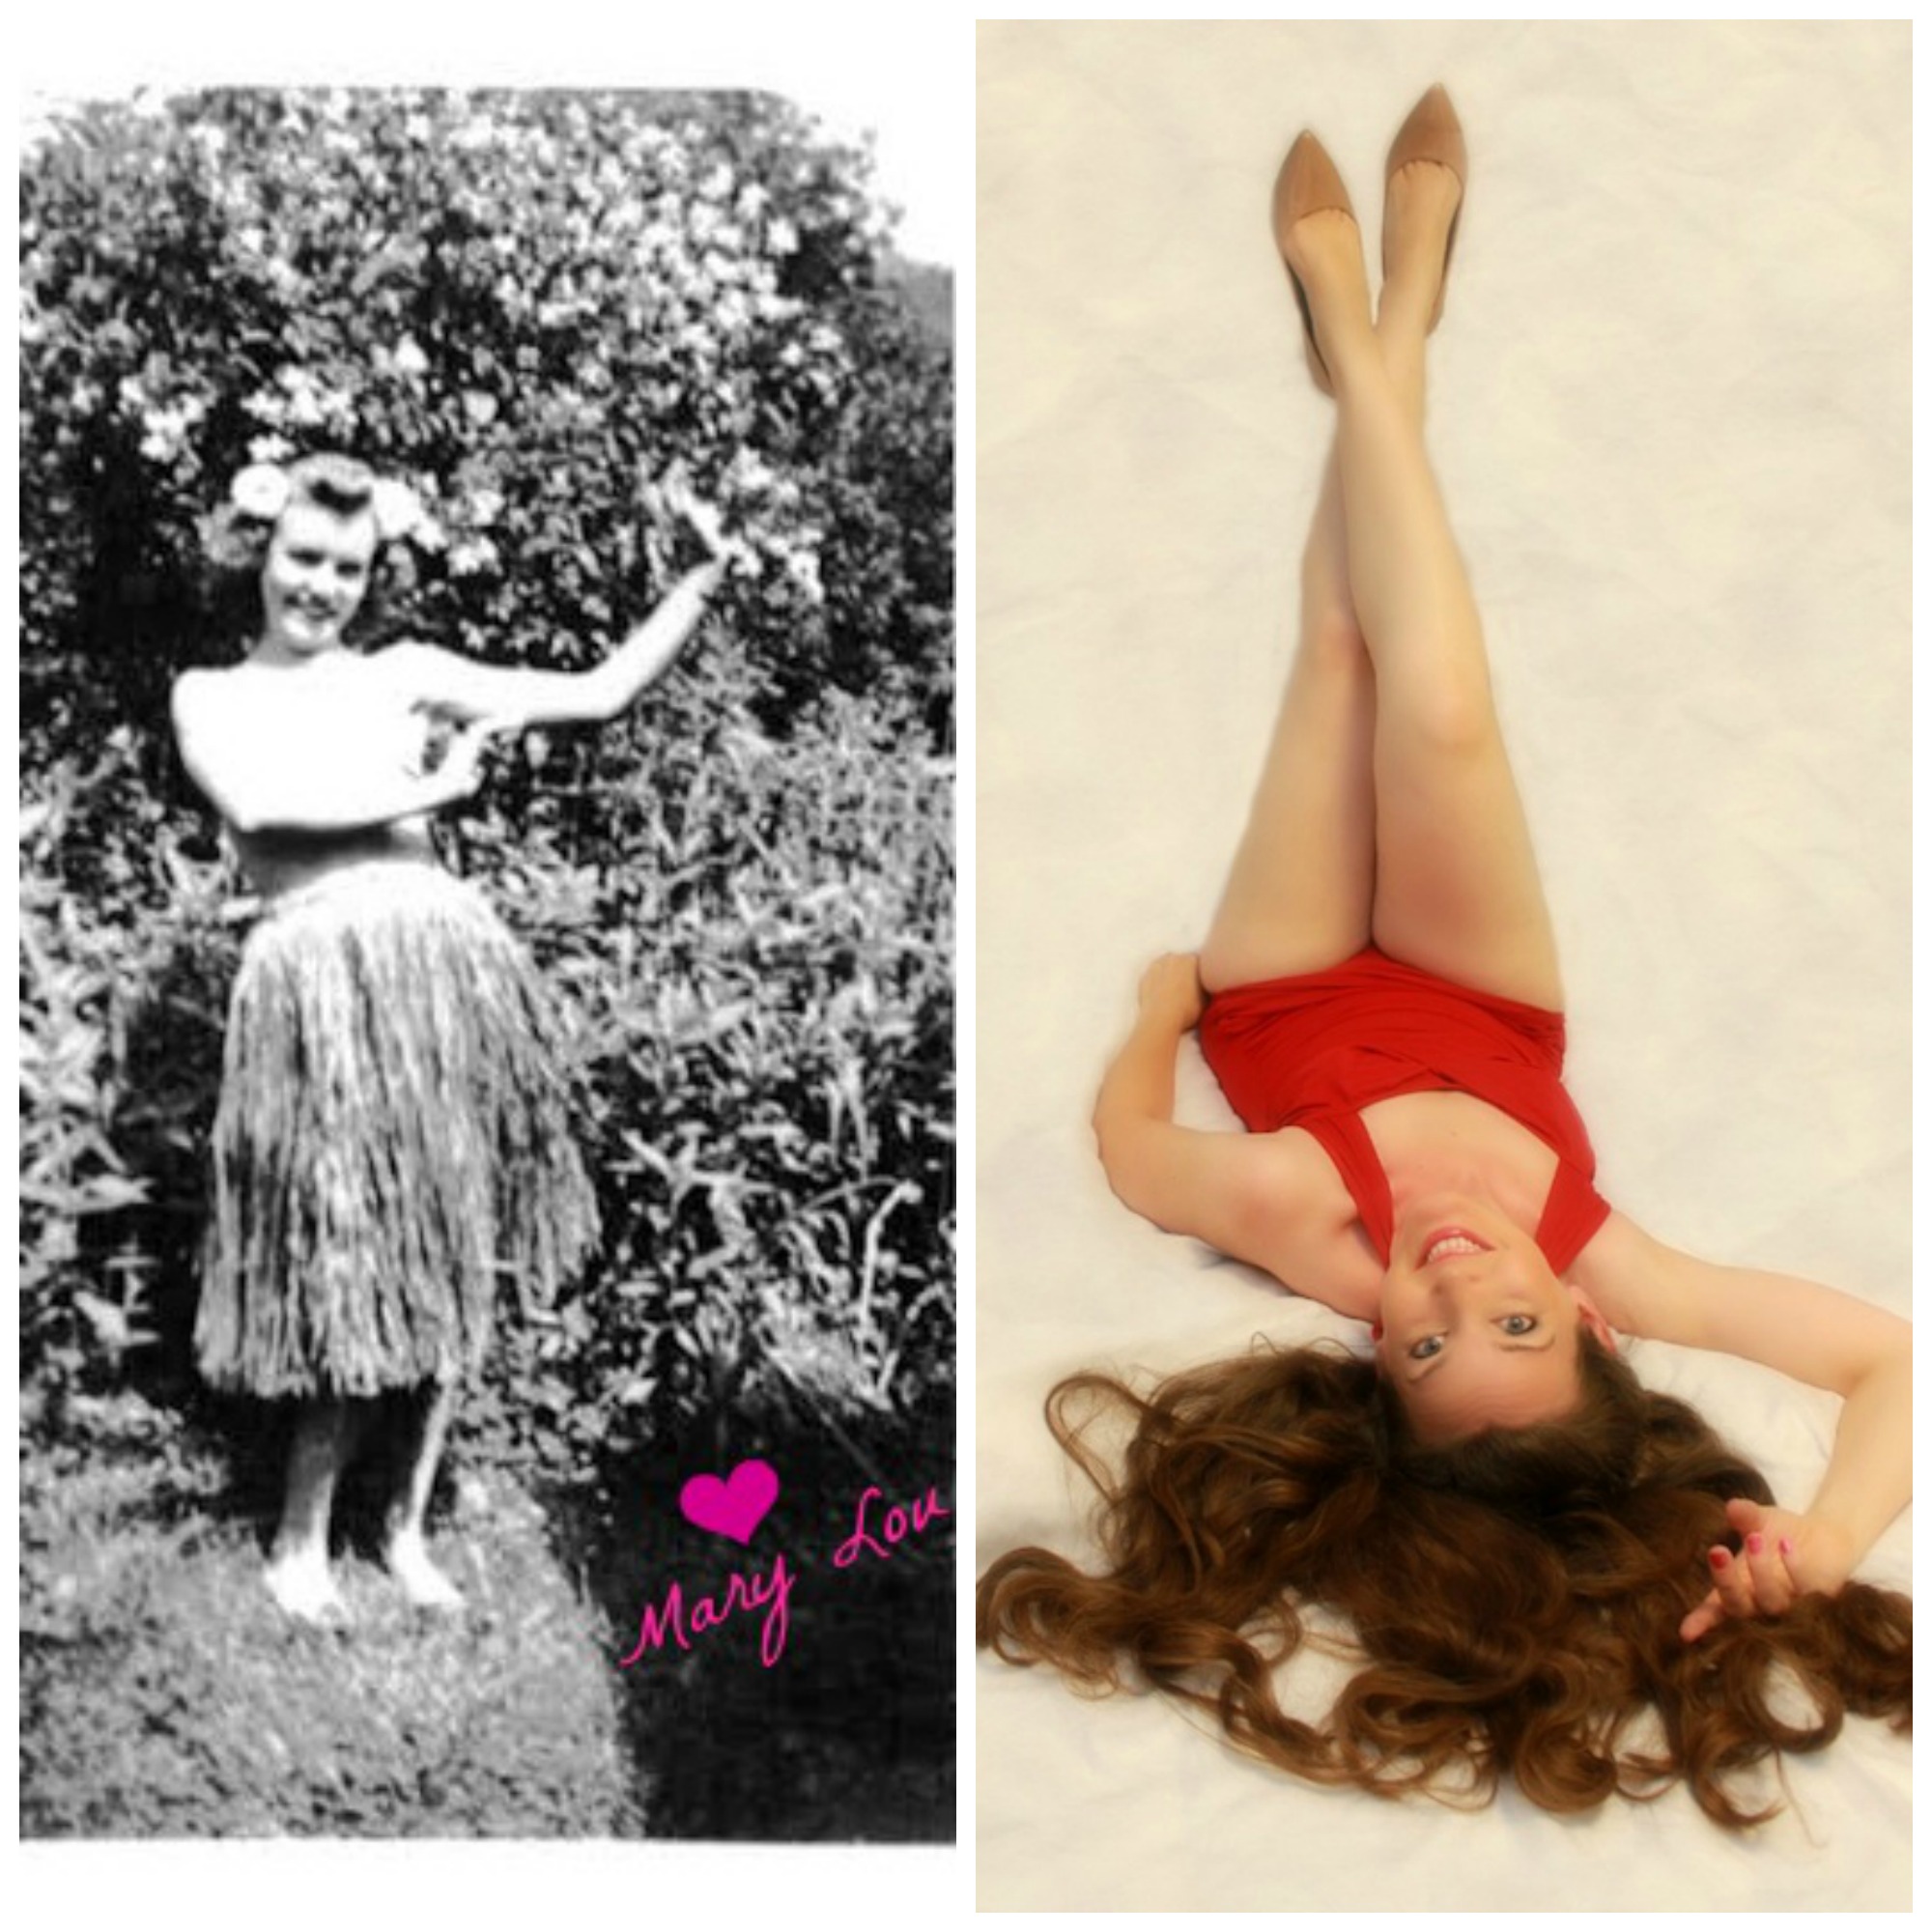 Pin Up Girl 6 Pro Tips From Military Spouses To Create A DIY Pin Up Photo  pic